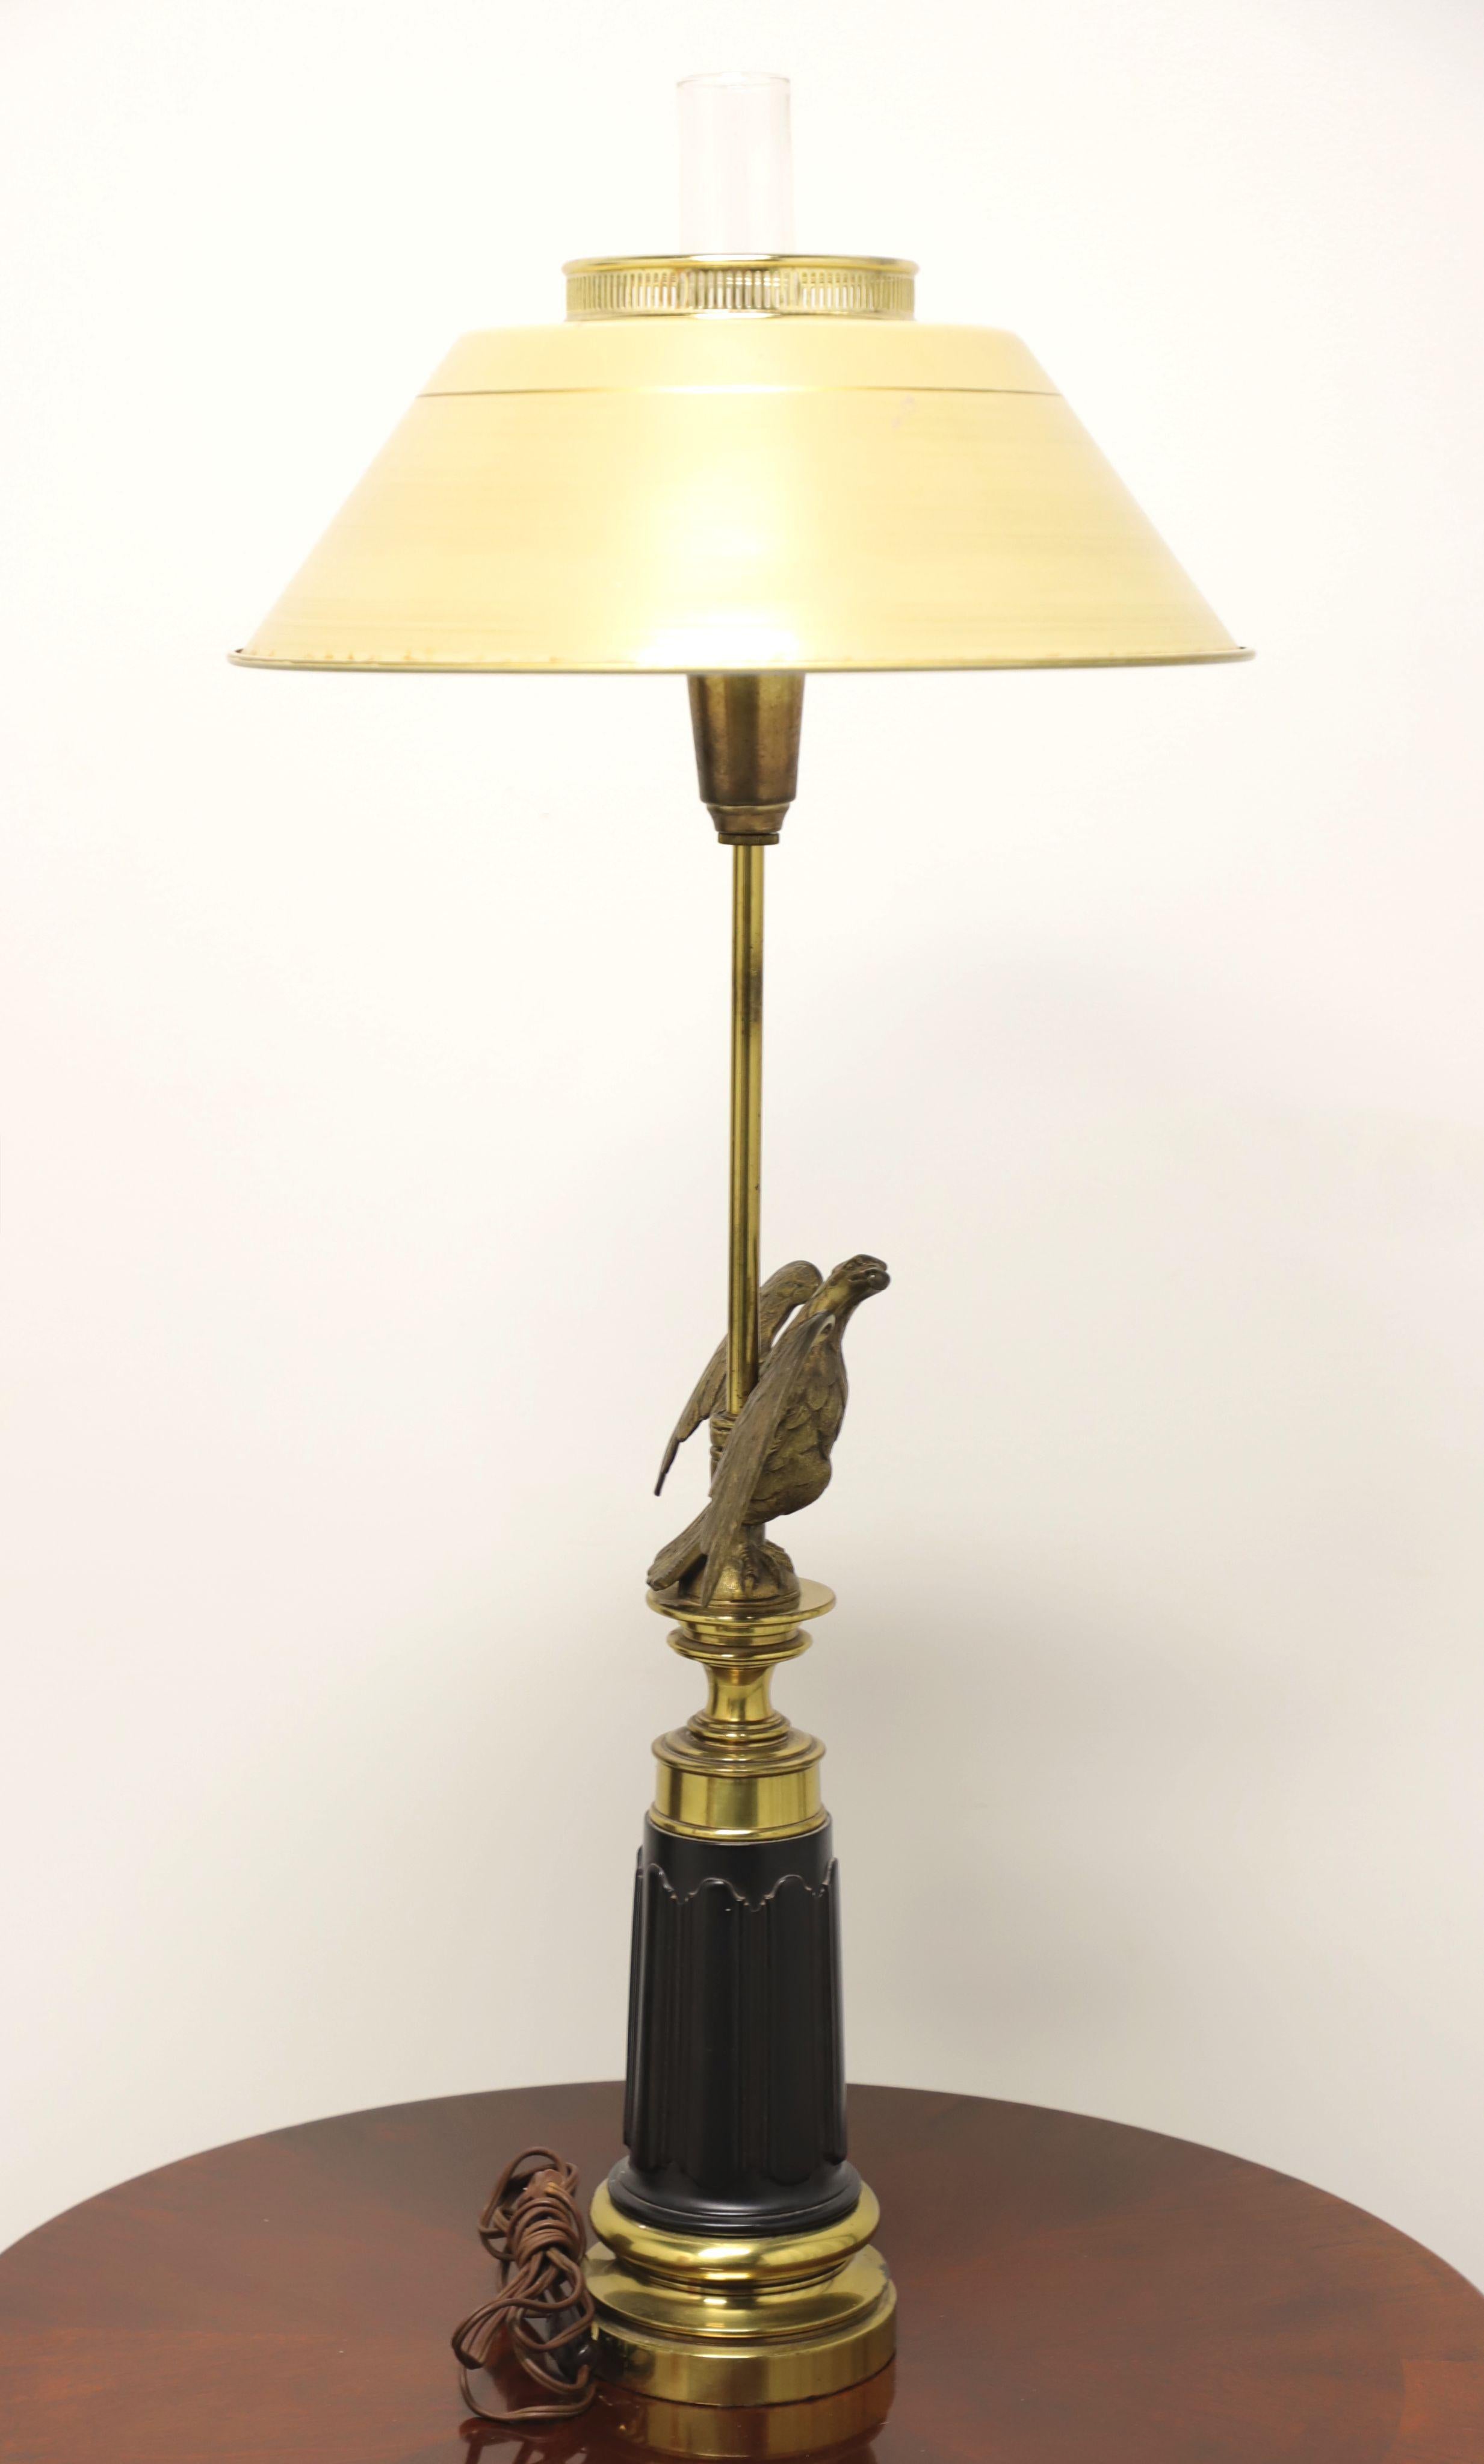 An Americana style American Eagle table lamp, unbranded. Solid brass with eagle perched on base, dark metal in center of base adds contrast and candlestick shaft to light fixture. Glass chimney inserts into light fixture and metal shade rests on